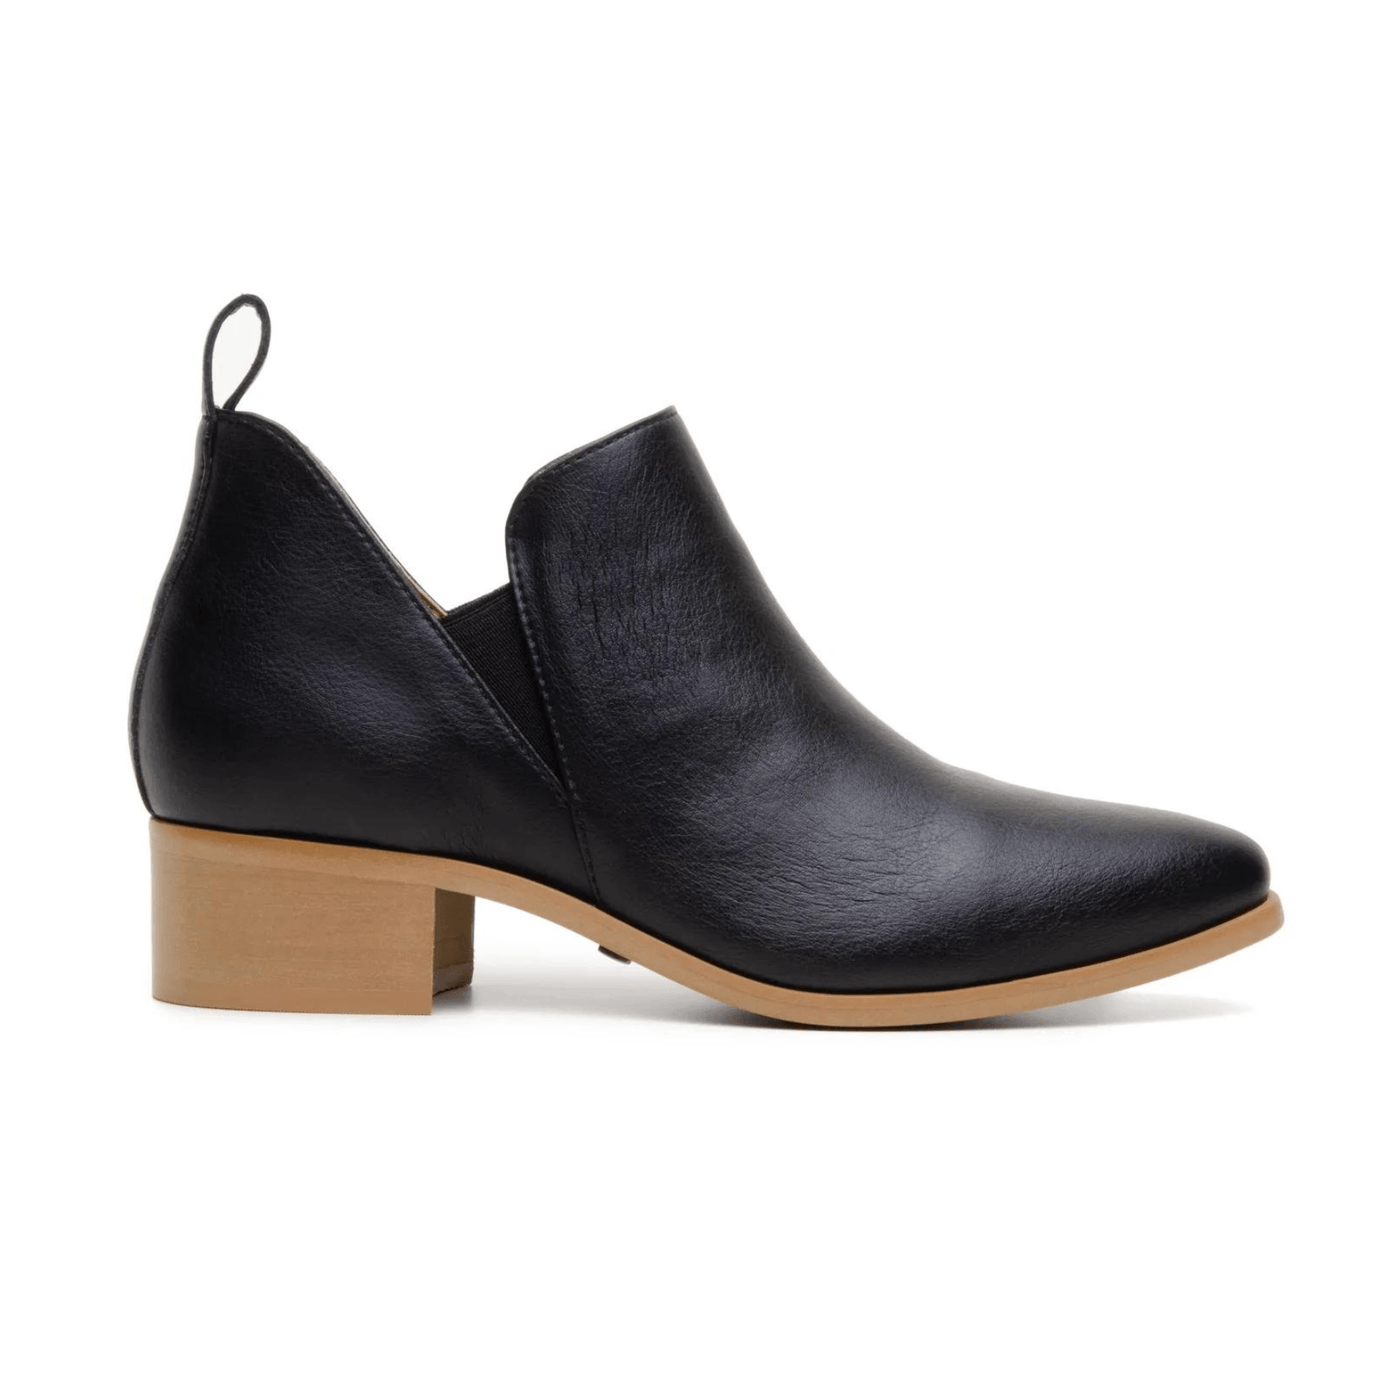 'Frankie' vegan leather pull-on bootie by Zette Shoes - black